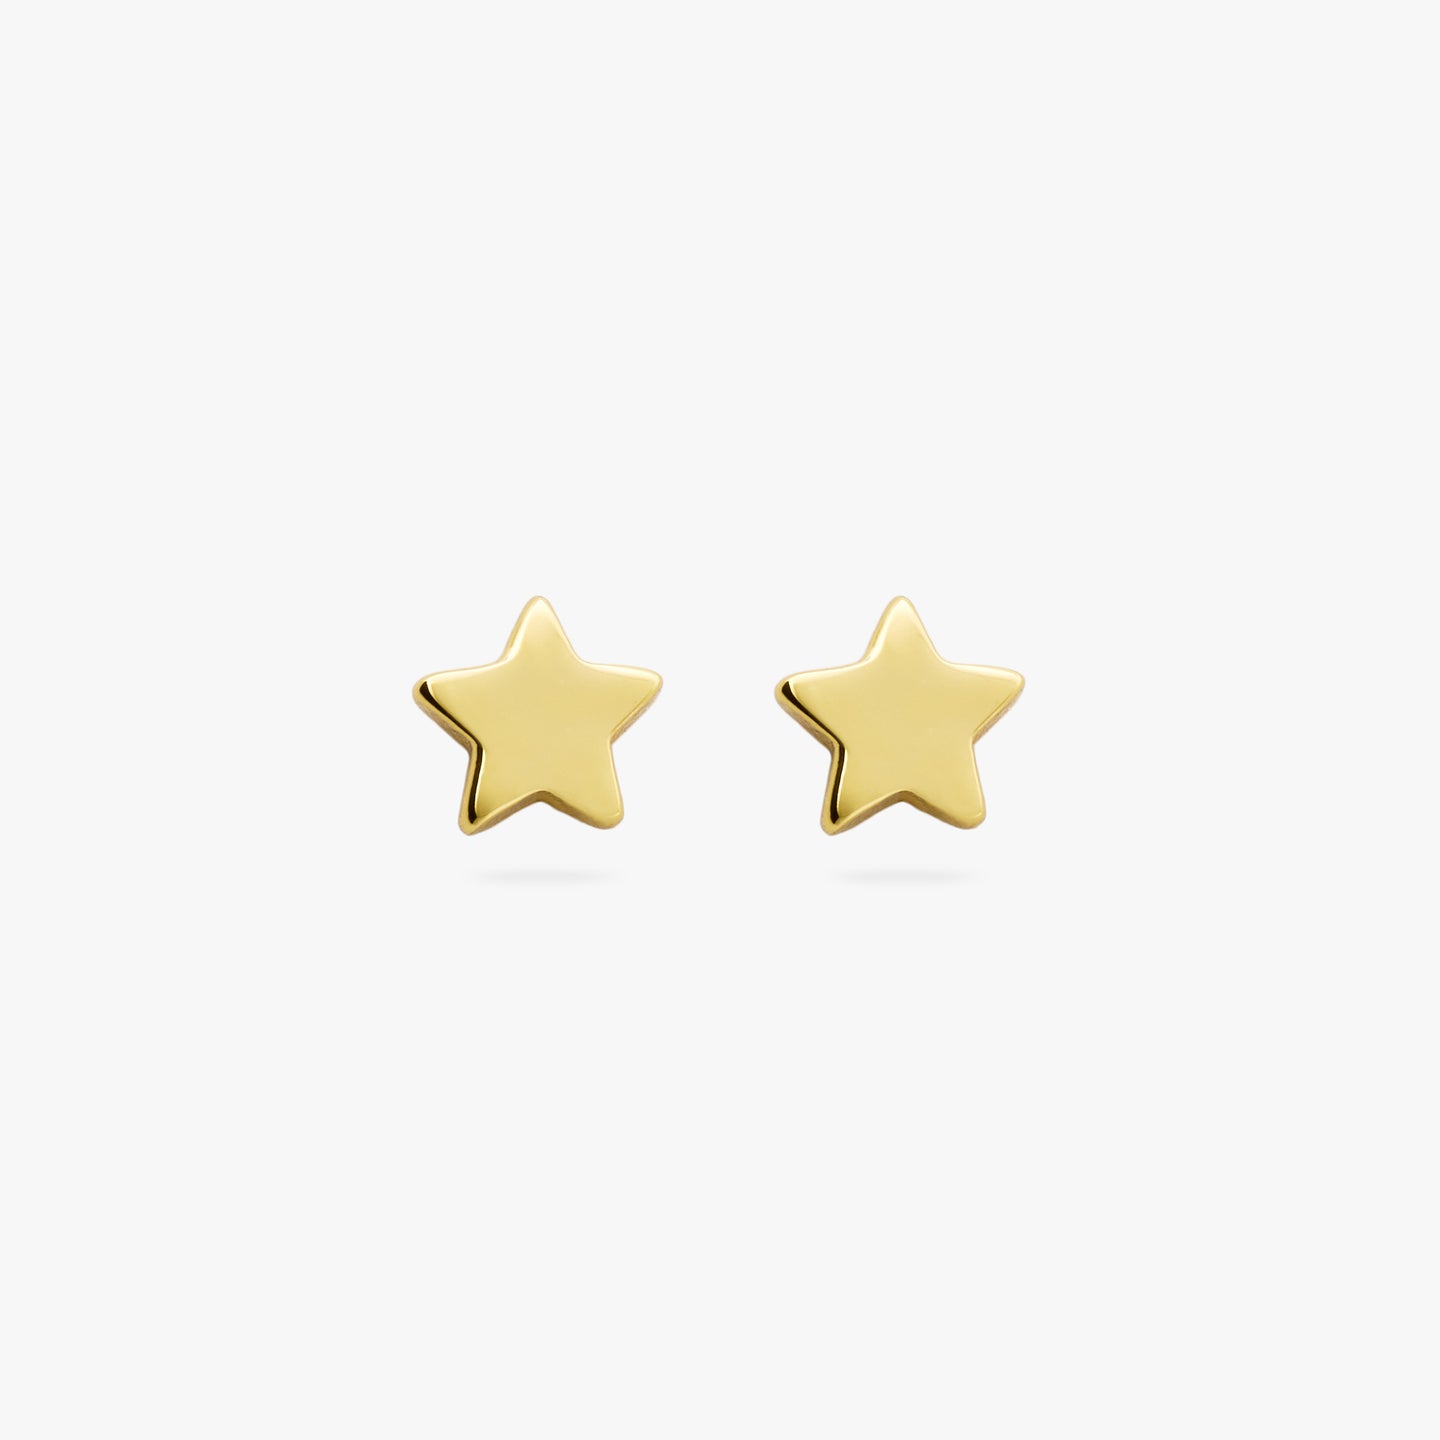 Aggregate 142+ small star stud earrings